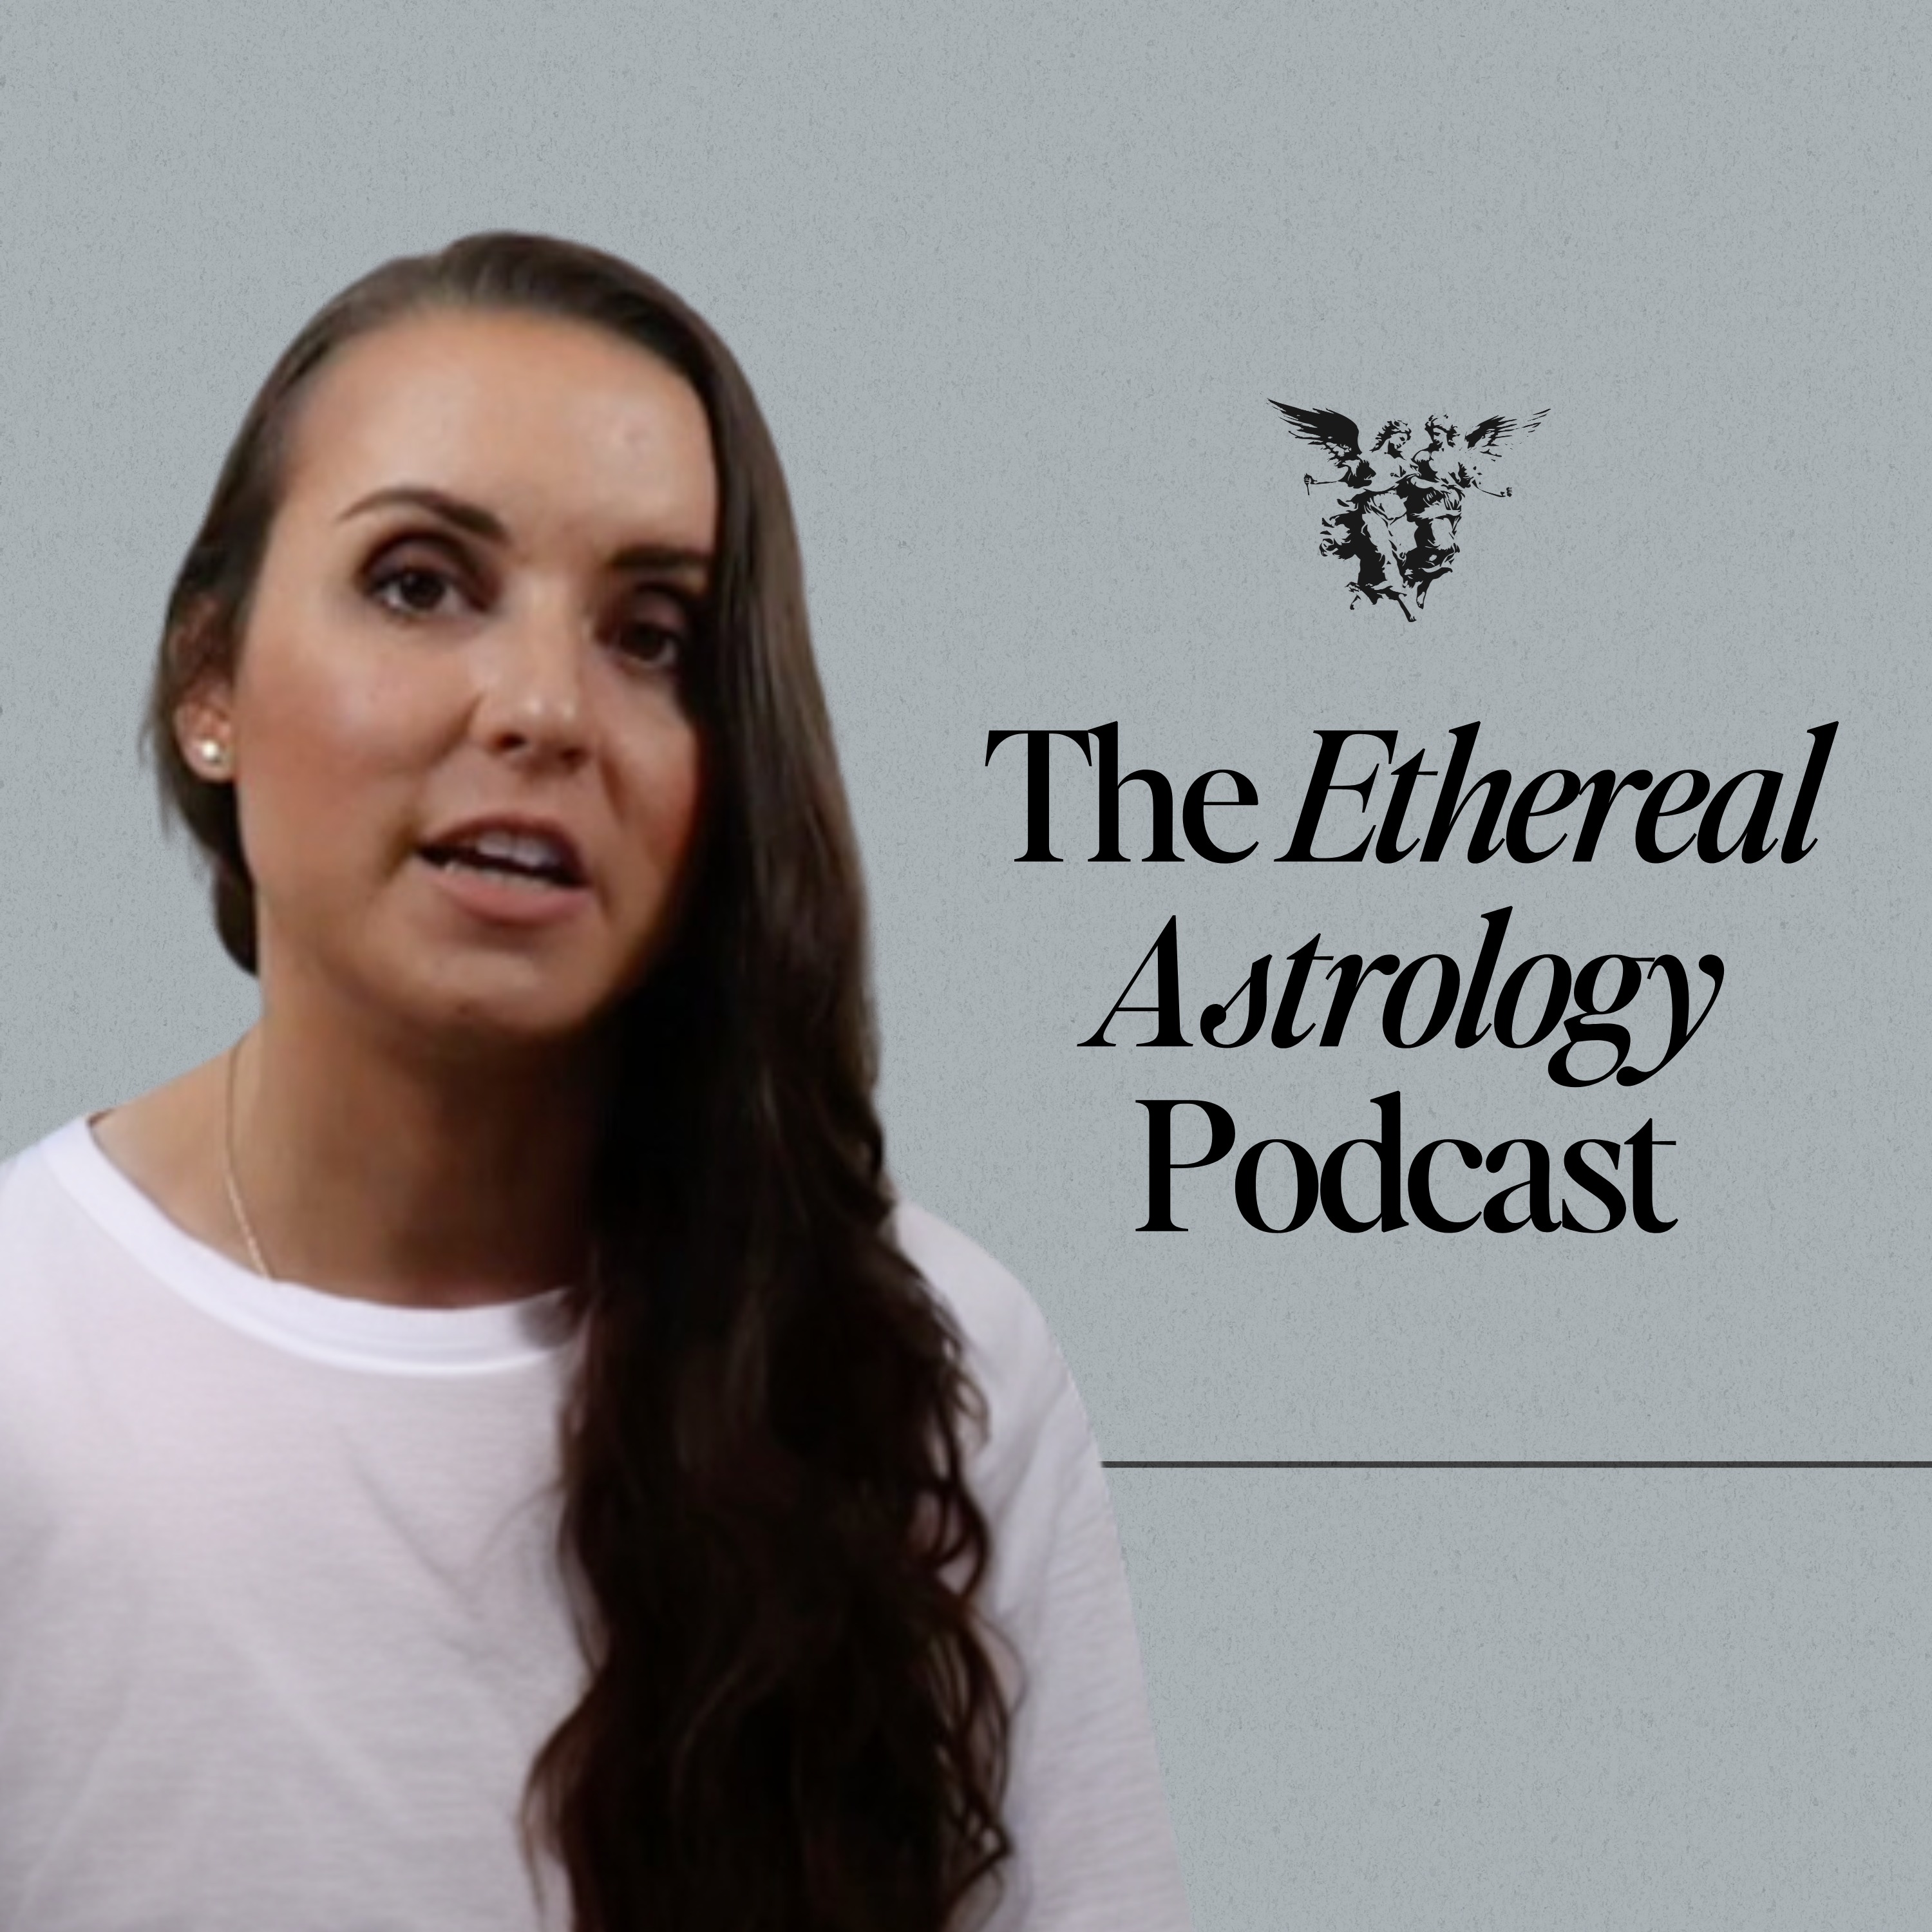 The Ethereal Astrology Podcast